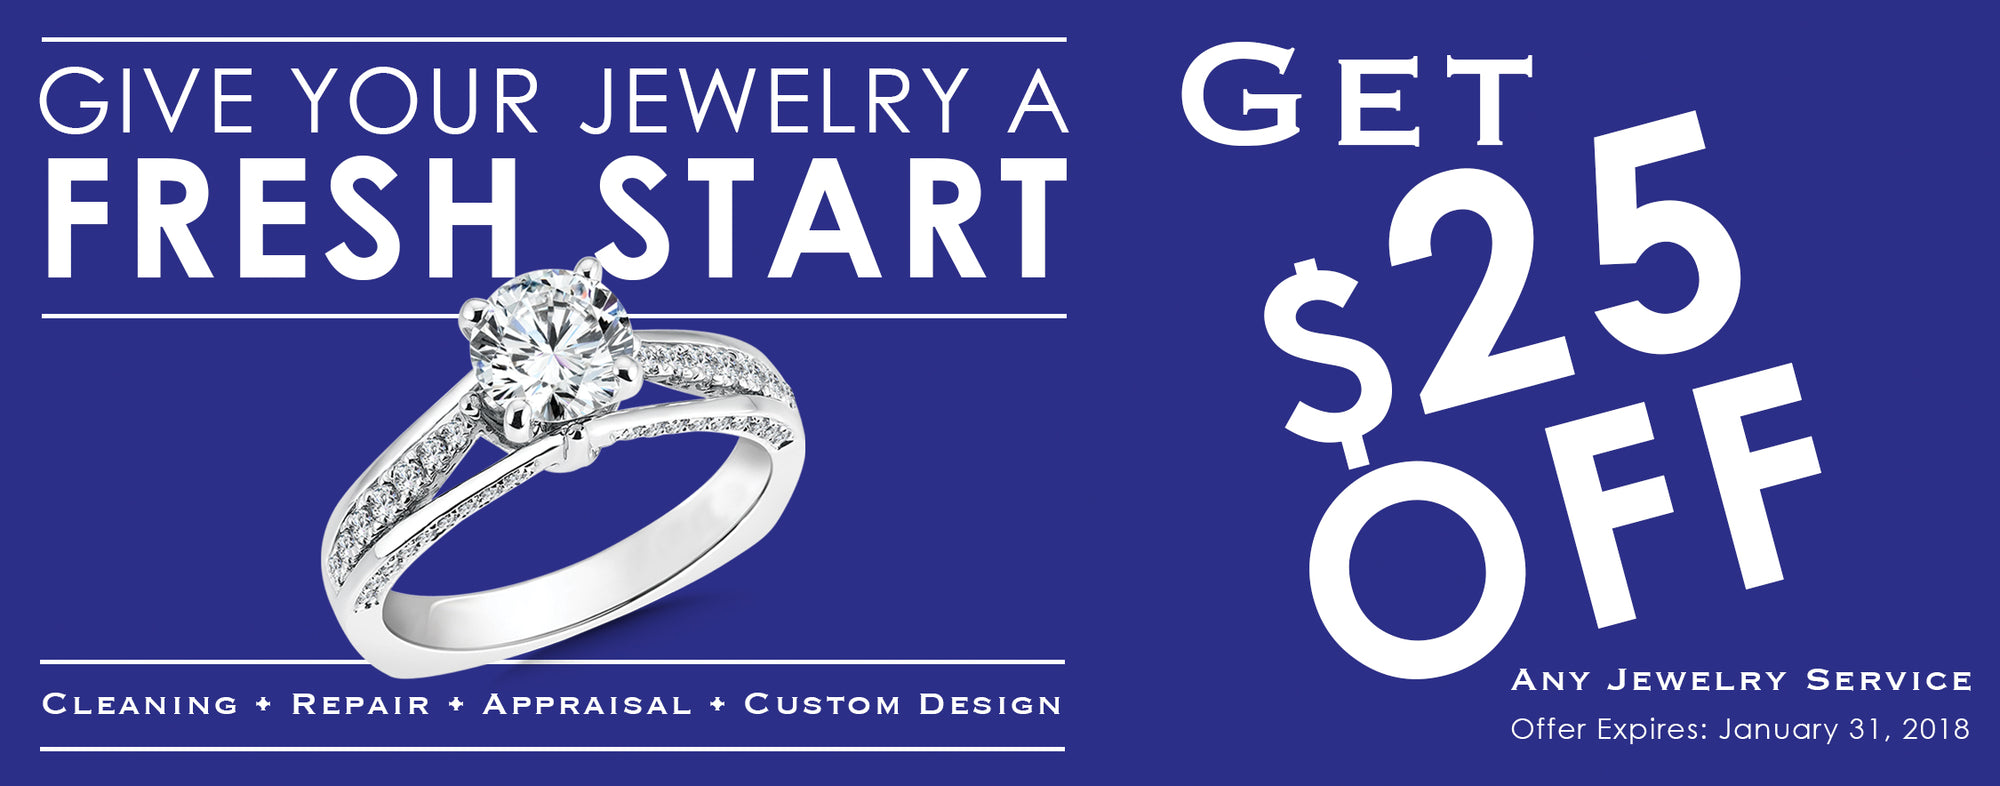 Jewelry Service In Farmington, NM: January 2018 Special Offer